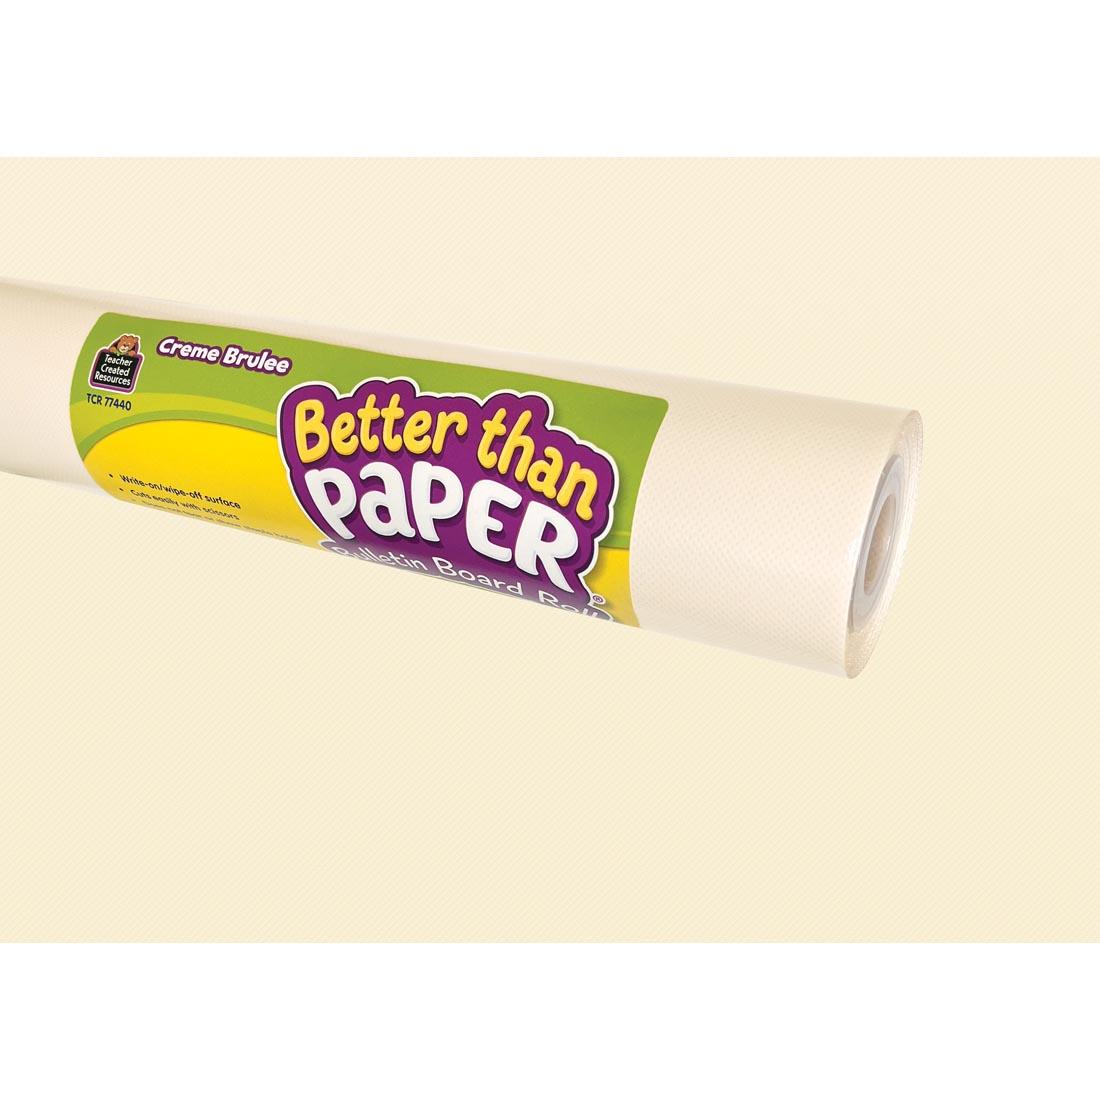 Creme Brulee Better Than Paper Bulletin Board Roll from the Classroom Cottage collection by Teacher Created Resources